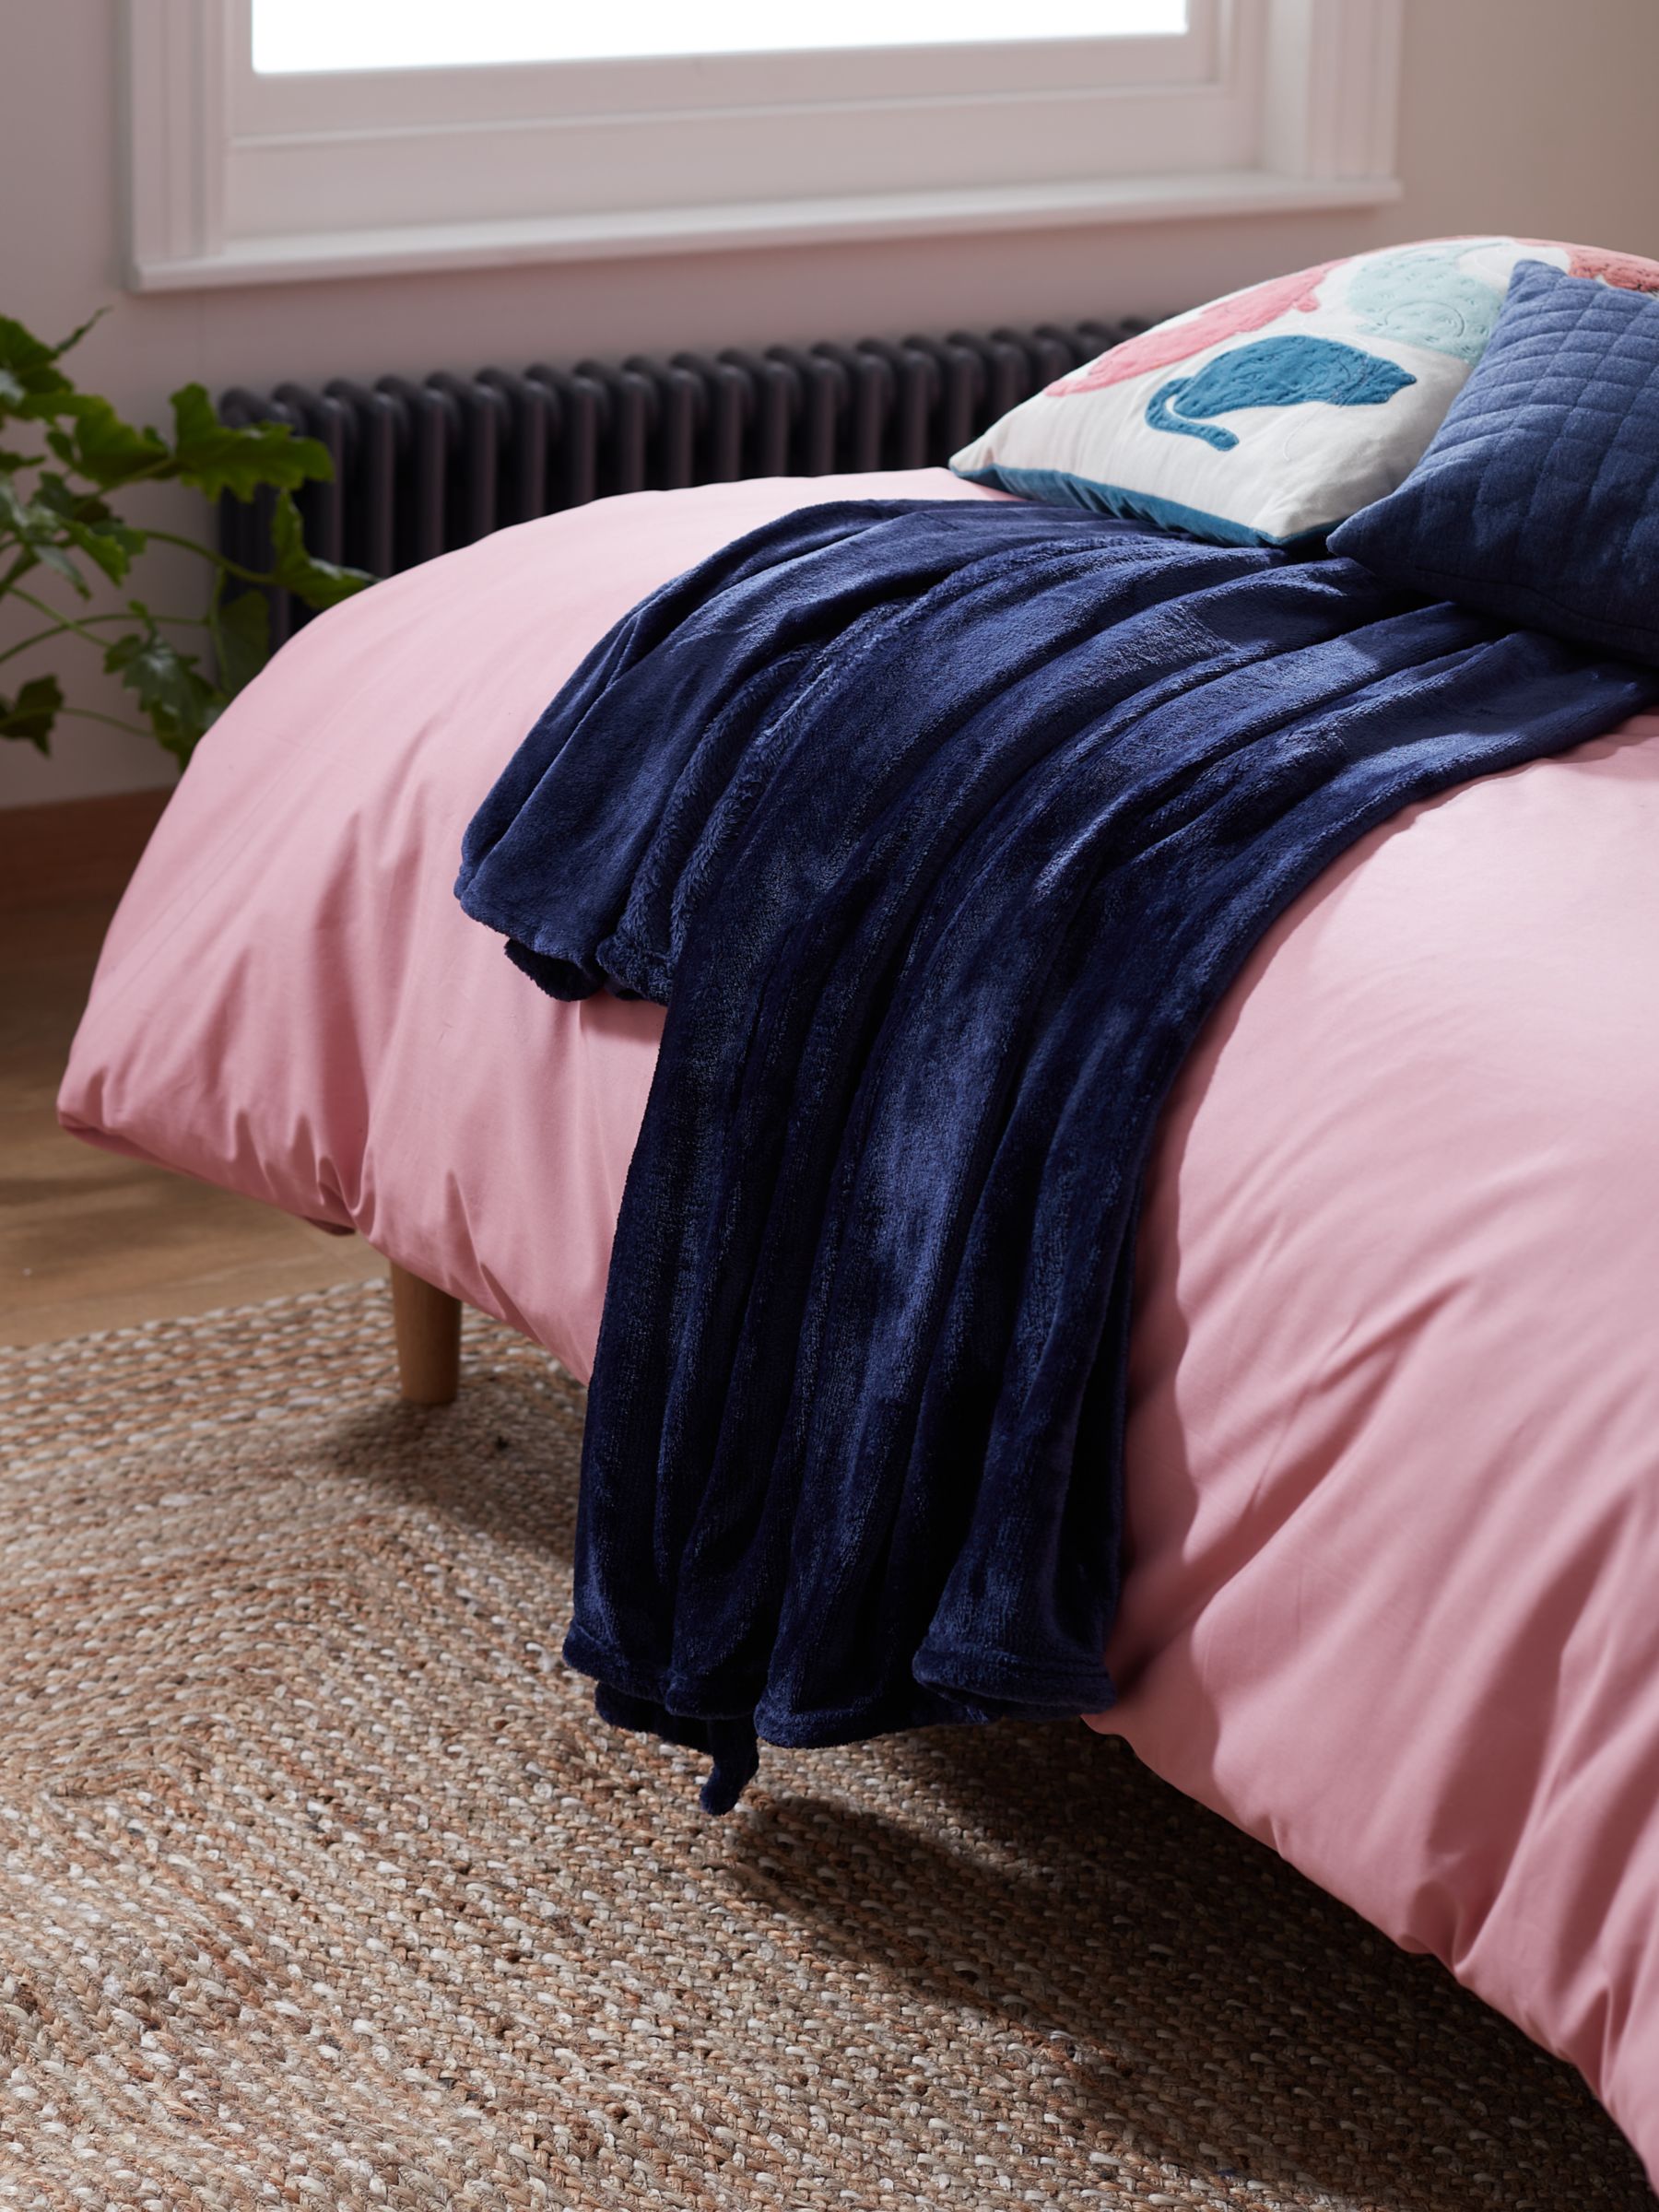 Throws, Blankets & Bedspreads, Bedding